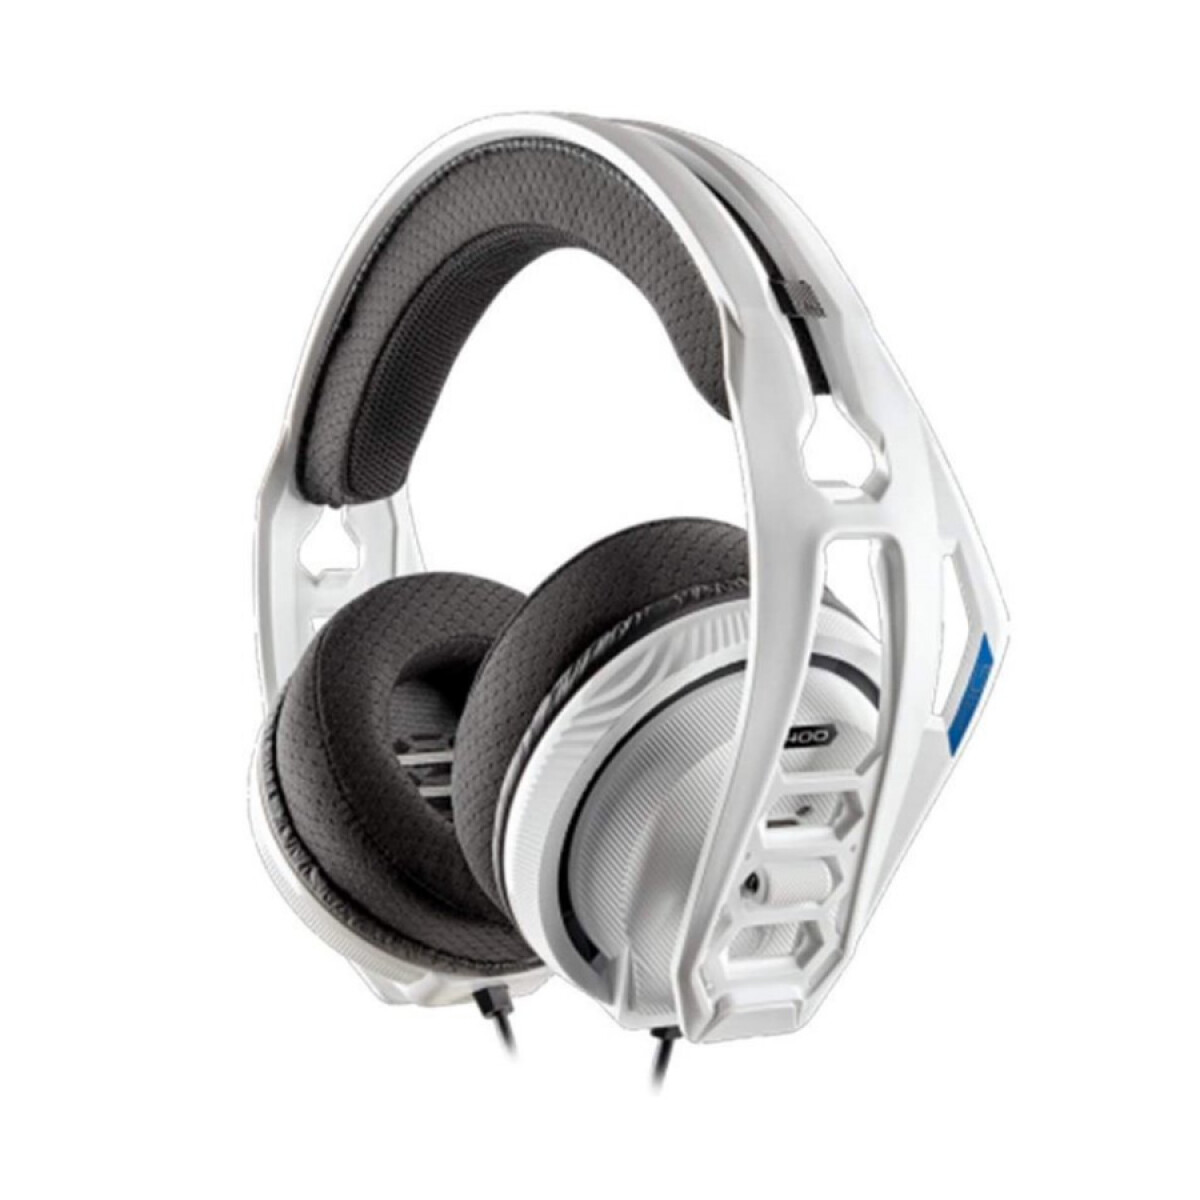 Headset Nacon Rig 400HS [Playstation] - White 